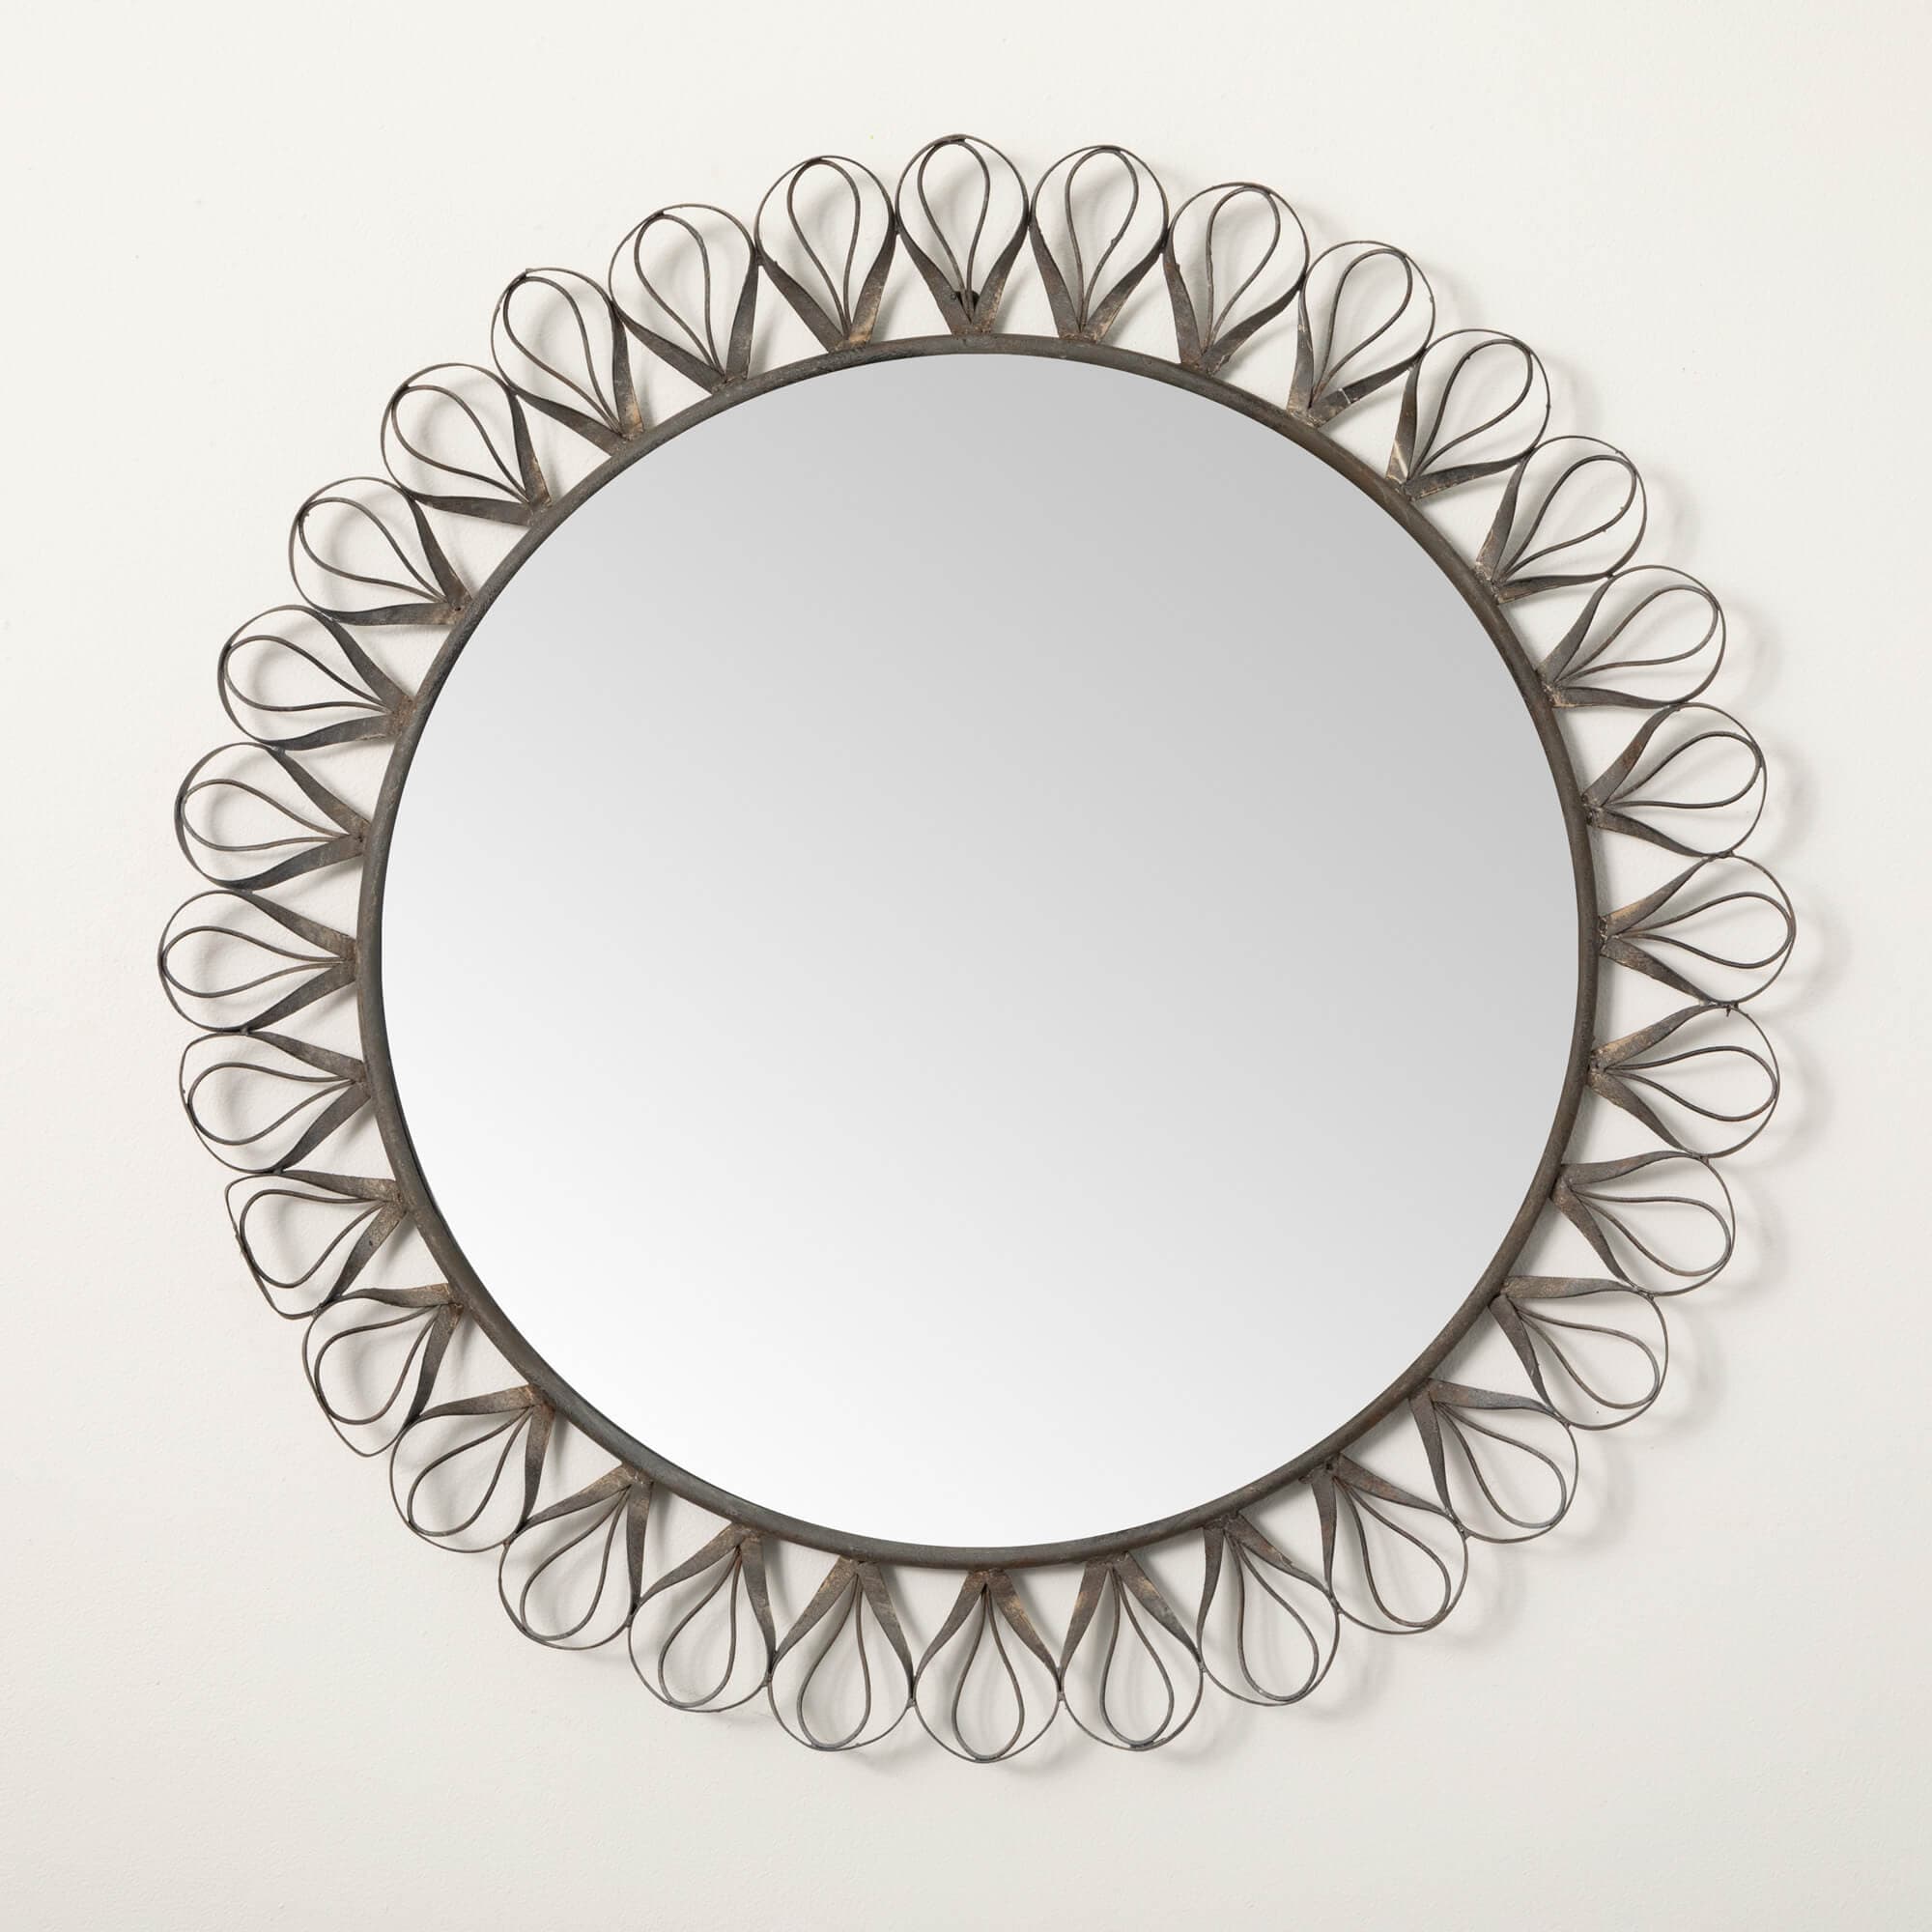 Baroque Scrollwork Round Wall Mirror Elevate Home Decor - Mirrors